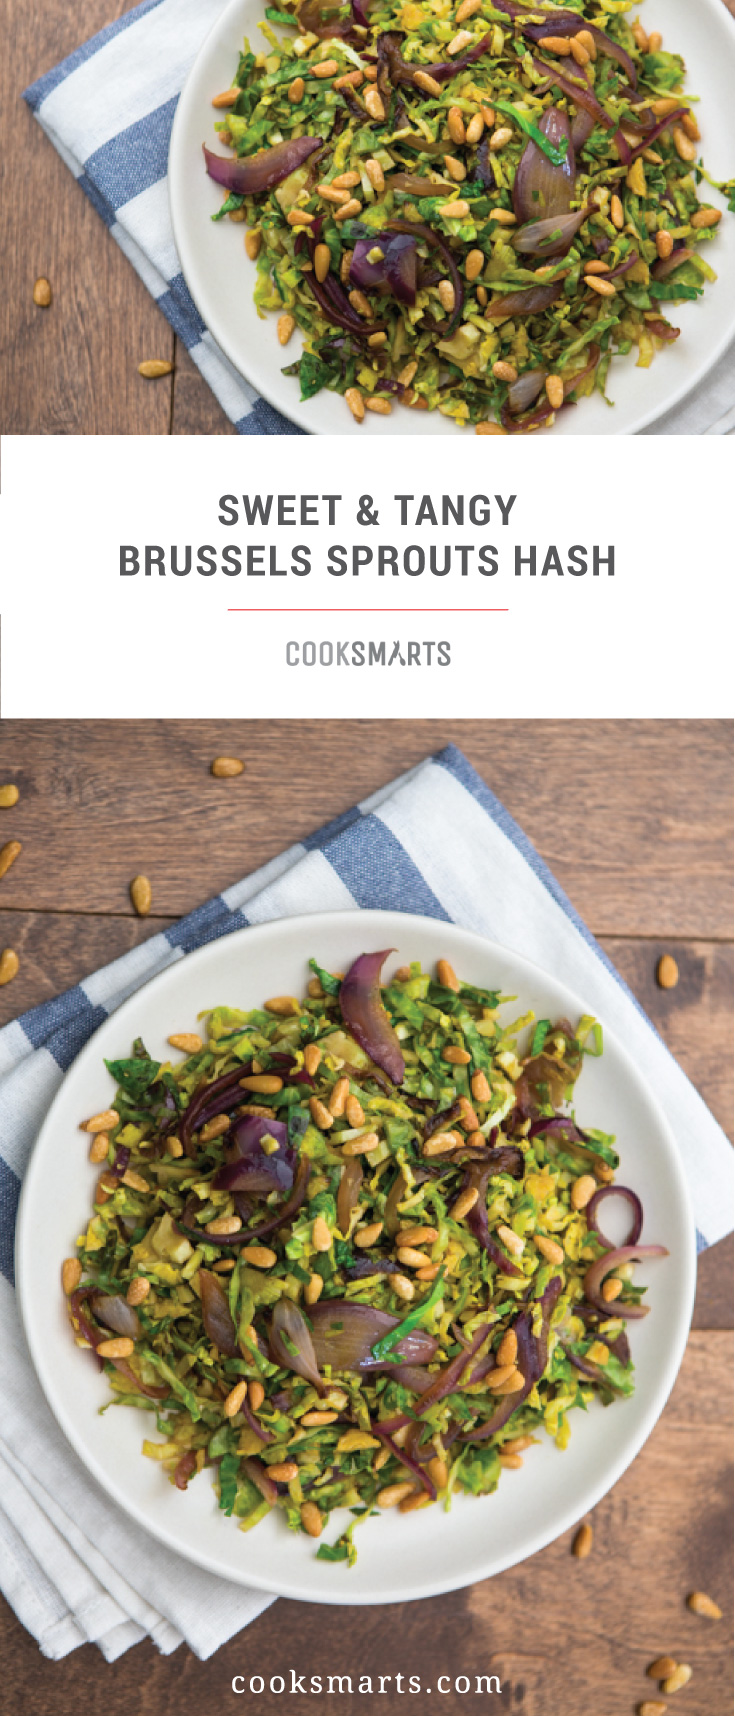 Sweet and Tangy Brussels Sprouts Hash Recipe | Cook Smarts